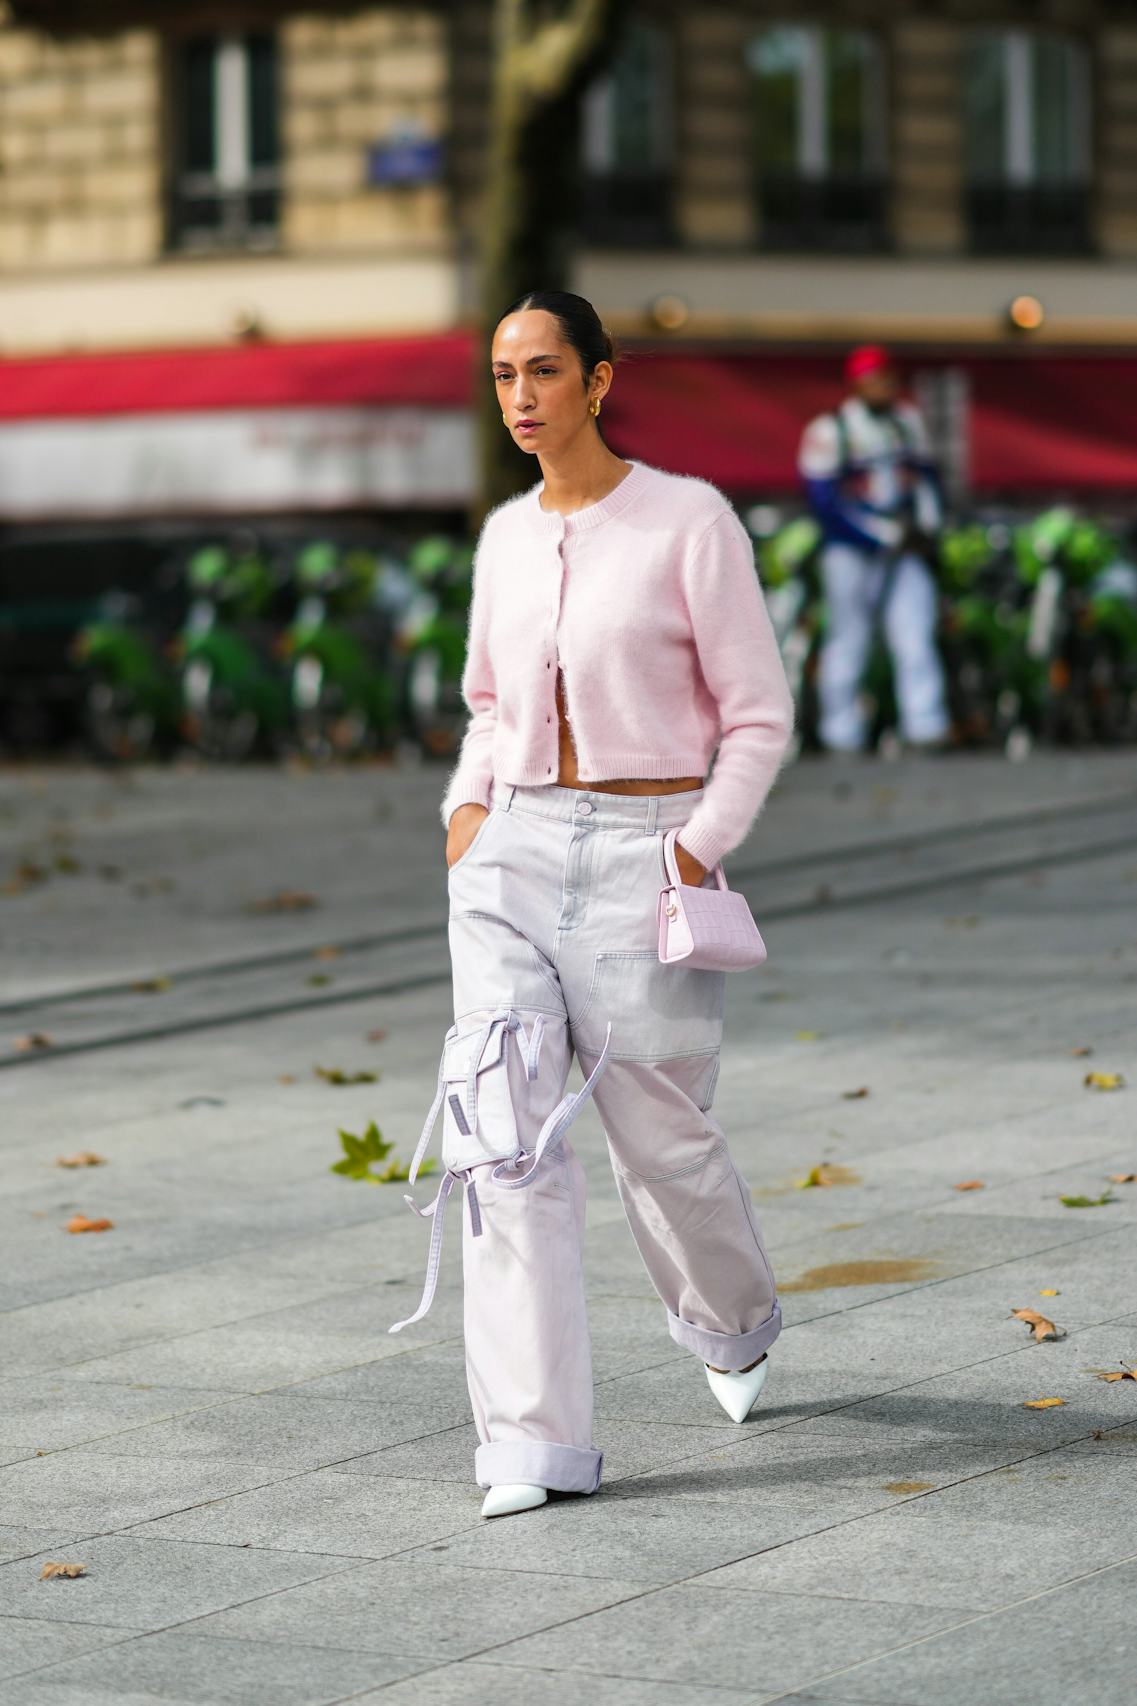 A Brief Exploration: Are Cargo Pants in Style Now?